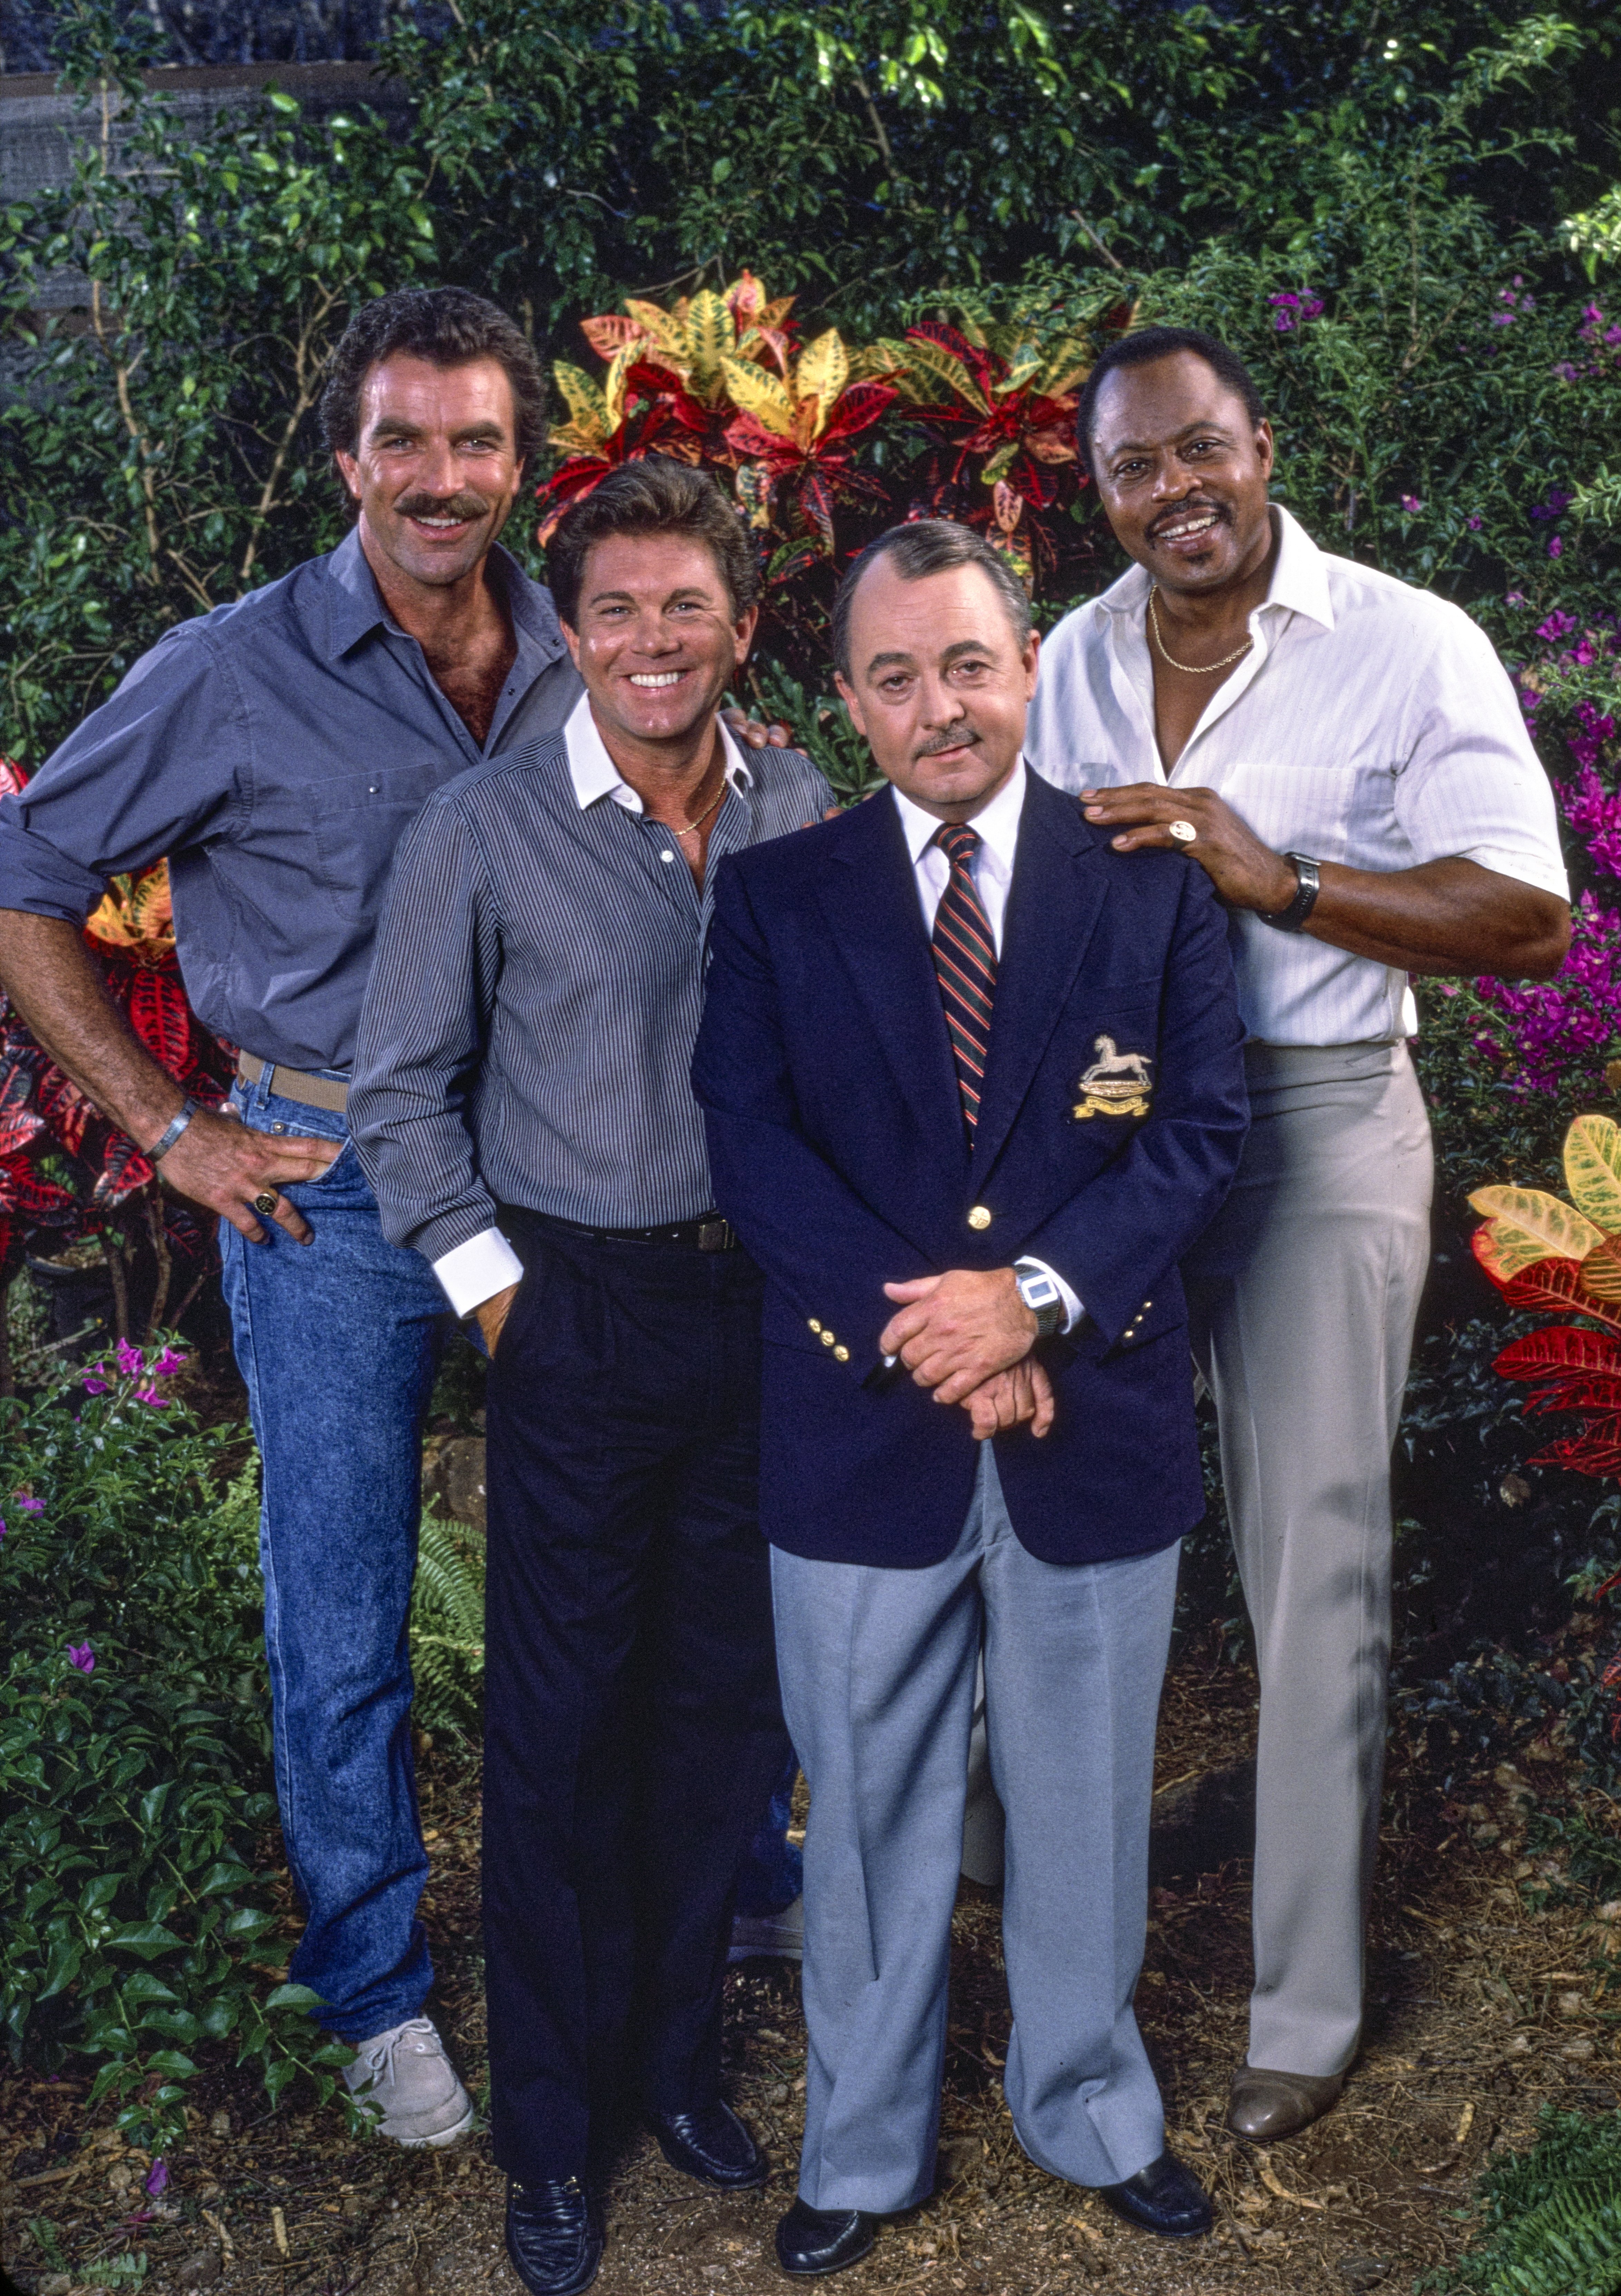 Tom Selleck (as Magnum), Larry Manetti (as Orville 'Rick' Wright), John Hillerman (as Higgins) and Roger E. Mosley (as Theodore 'TC' Calvin) in the CBS television show "Magnum P.I" | Source: Getty Images